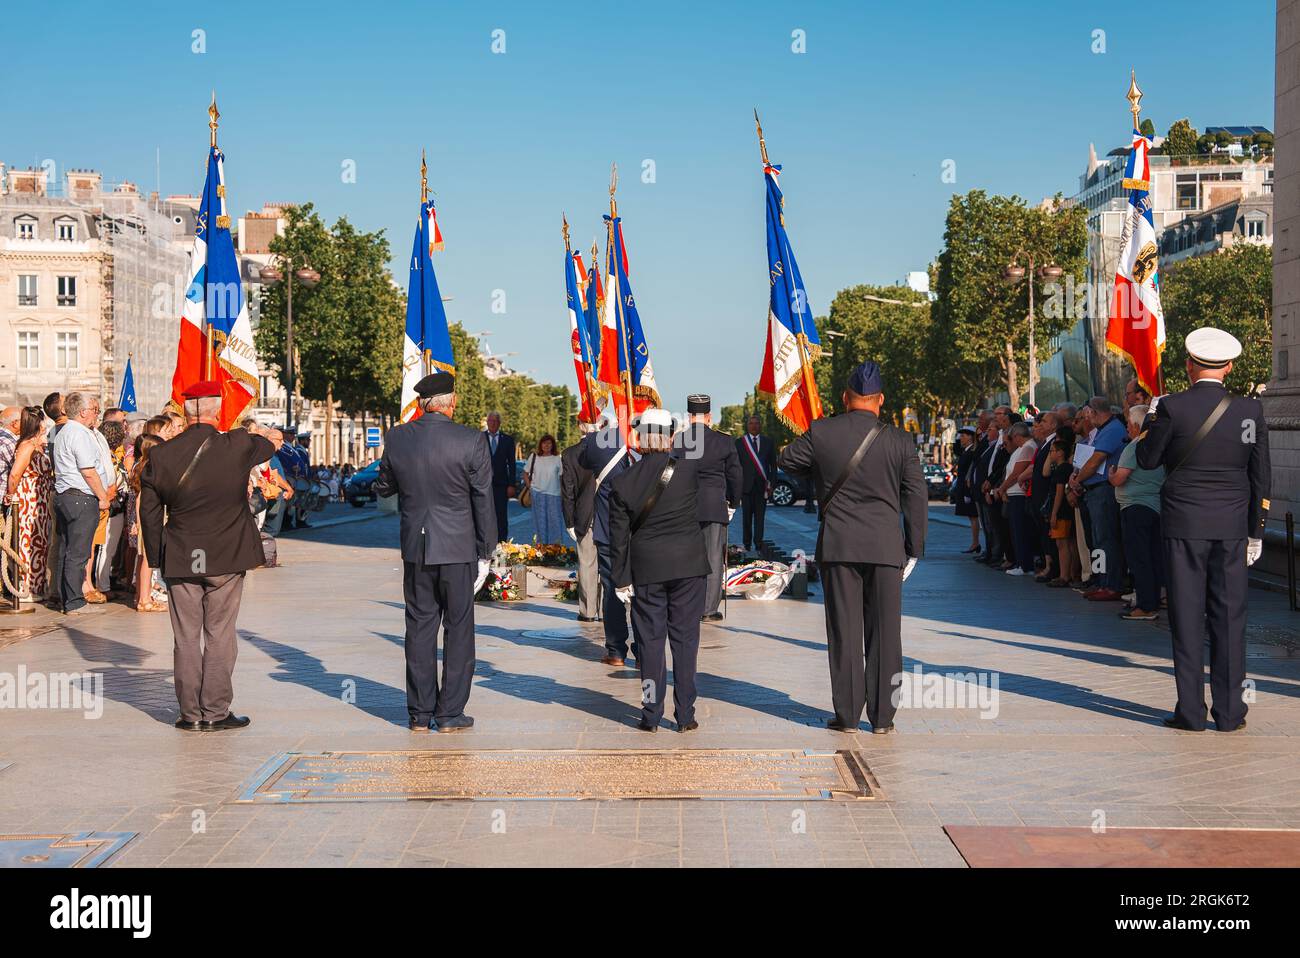 Group at Monument with Flags in Sunny Paris Stock Photo